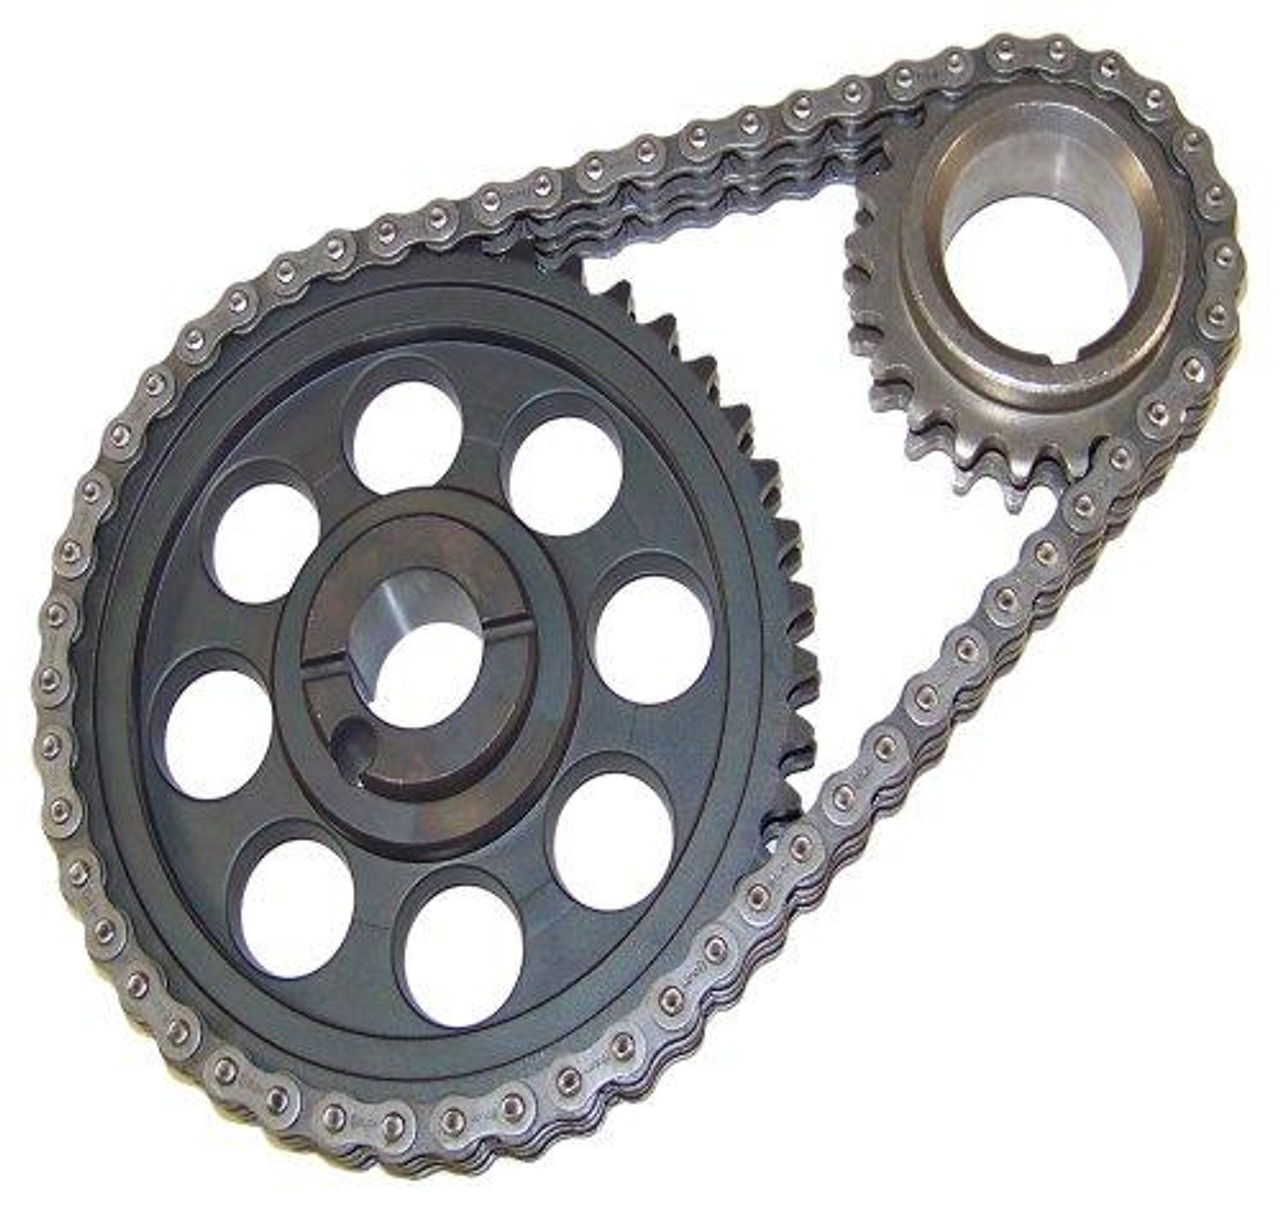 Timing Chain Kit - 2001 Mercury Mountaineer 5.0L Engine Parts # TK4113ZE138